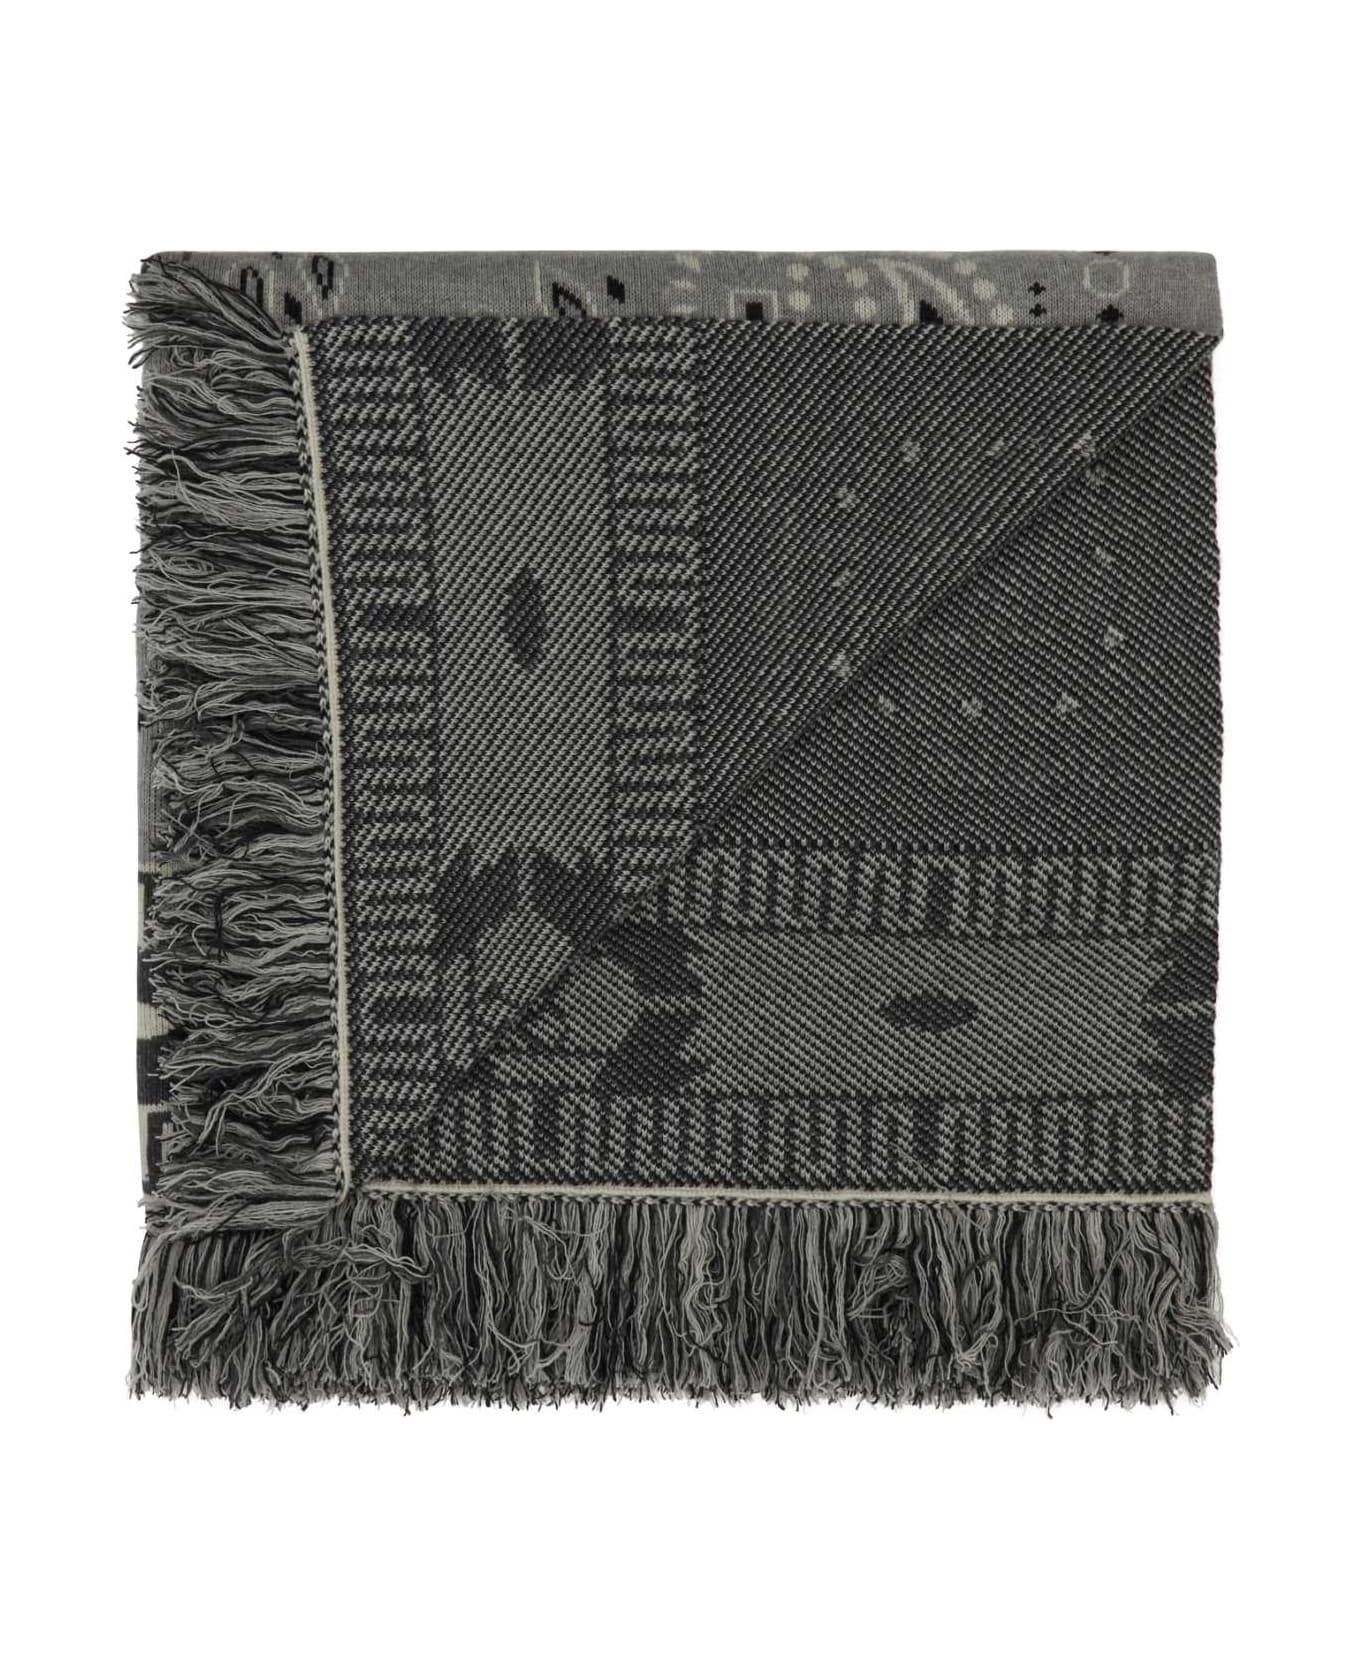 Alanui Embroidered Cashmere Blend Icon Blanket - 0506